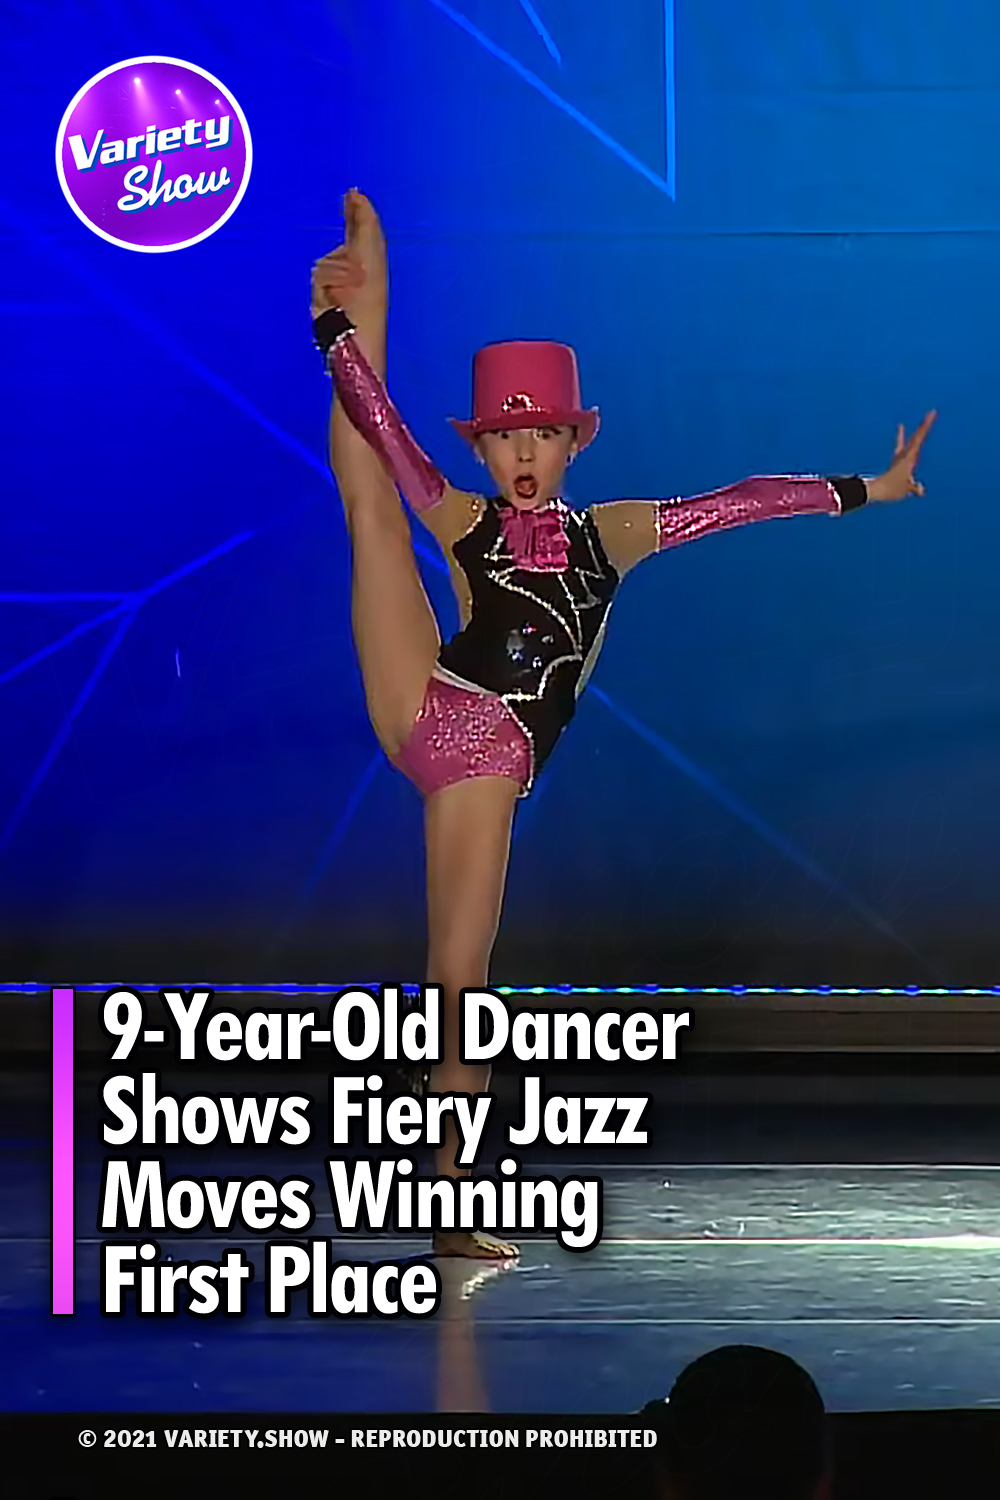 9-Year-Old Dancer Shows Fiery Jazz Moves Winning First Place